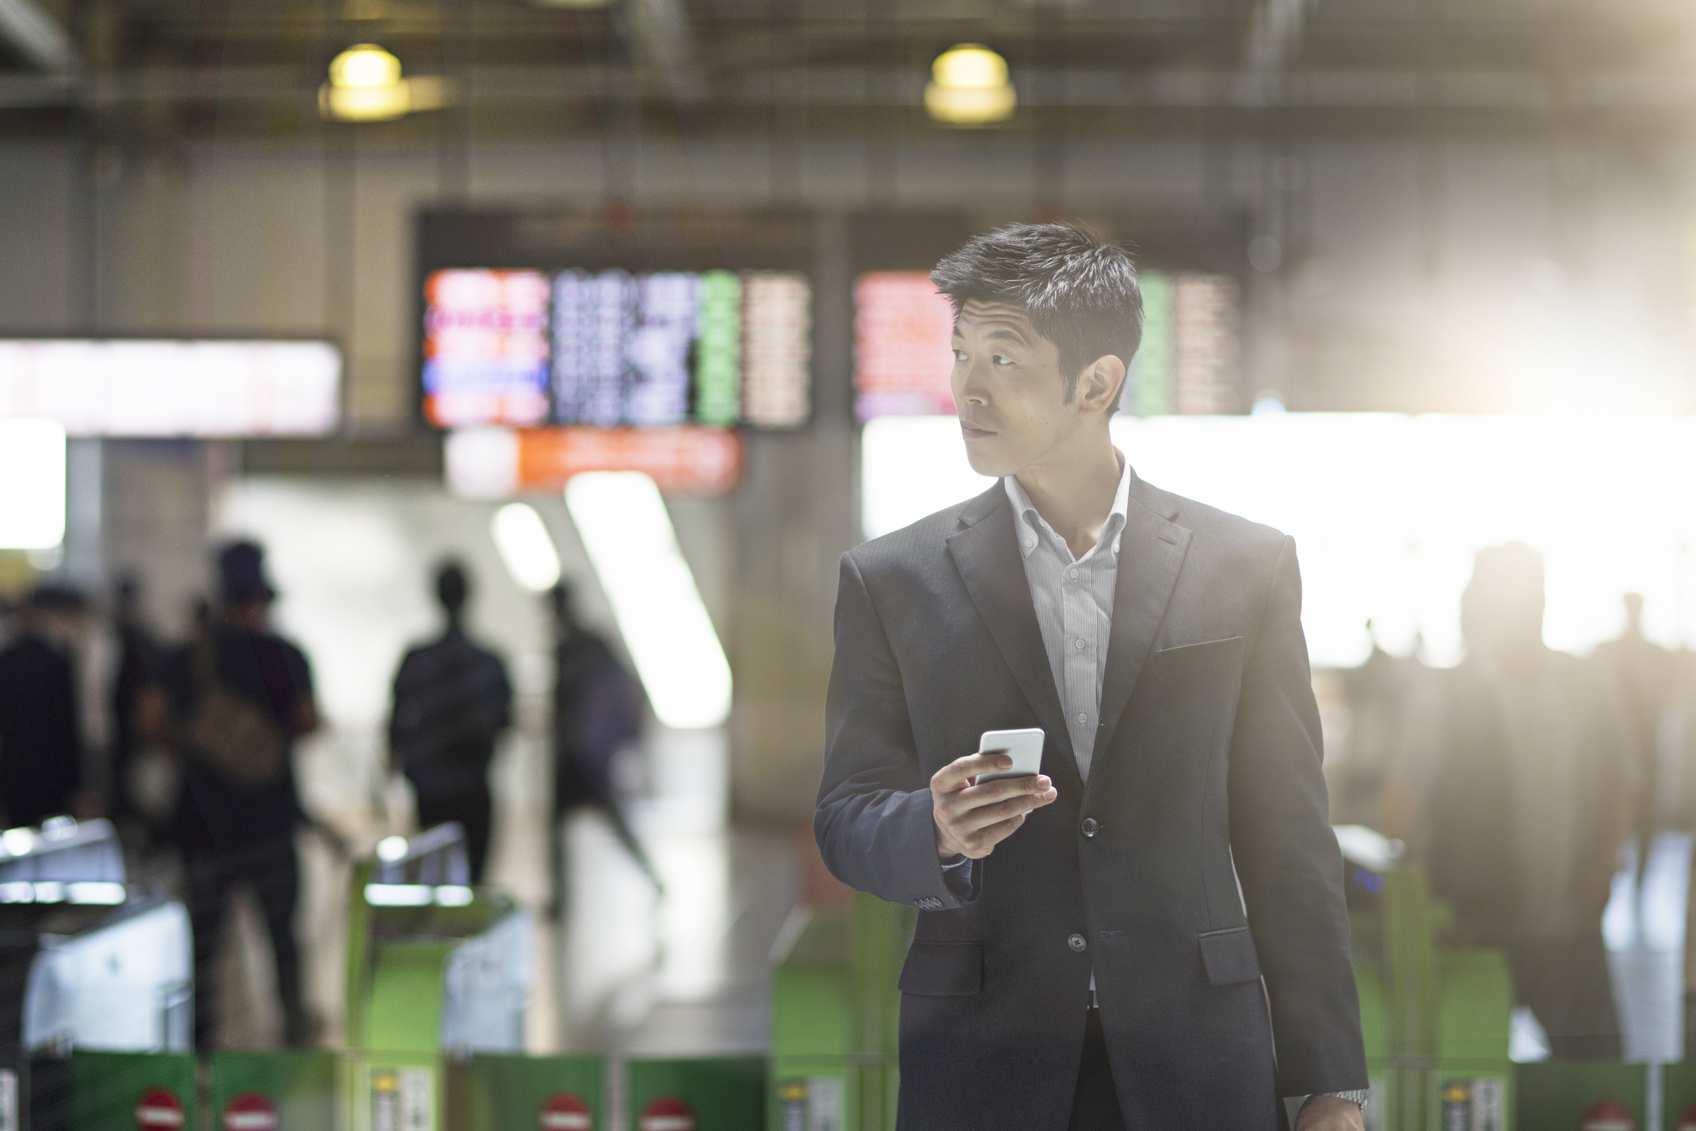 A policyholder in Asia clutches a smartphone and moves through an airport terminal